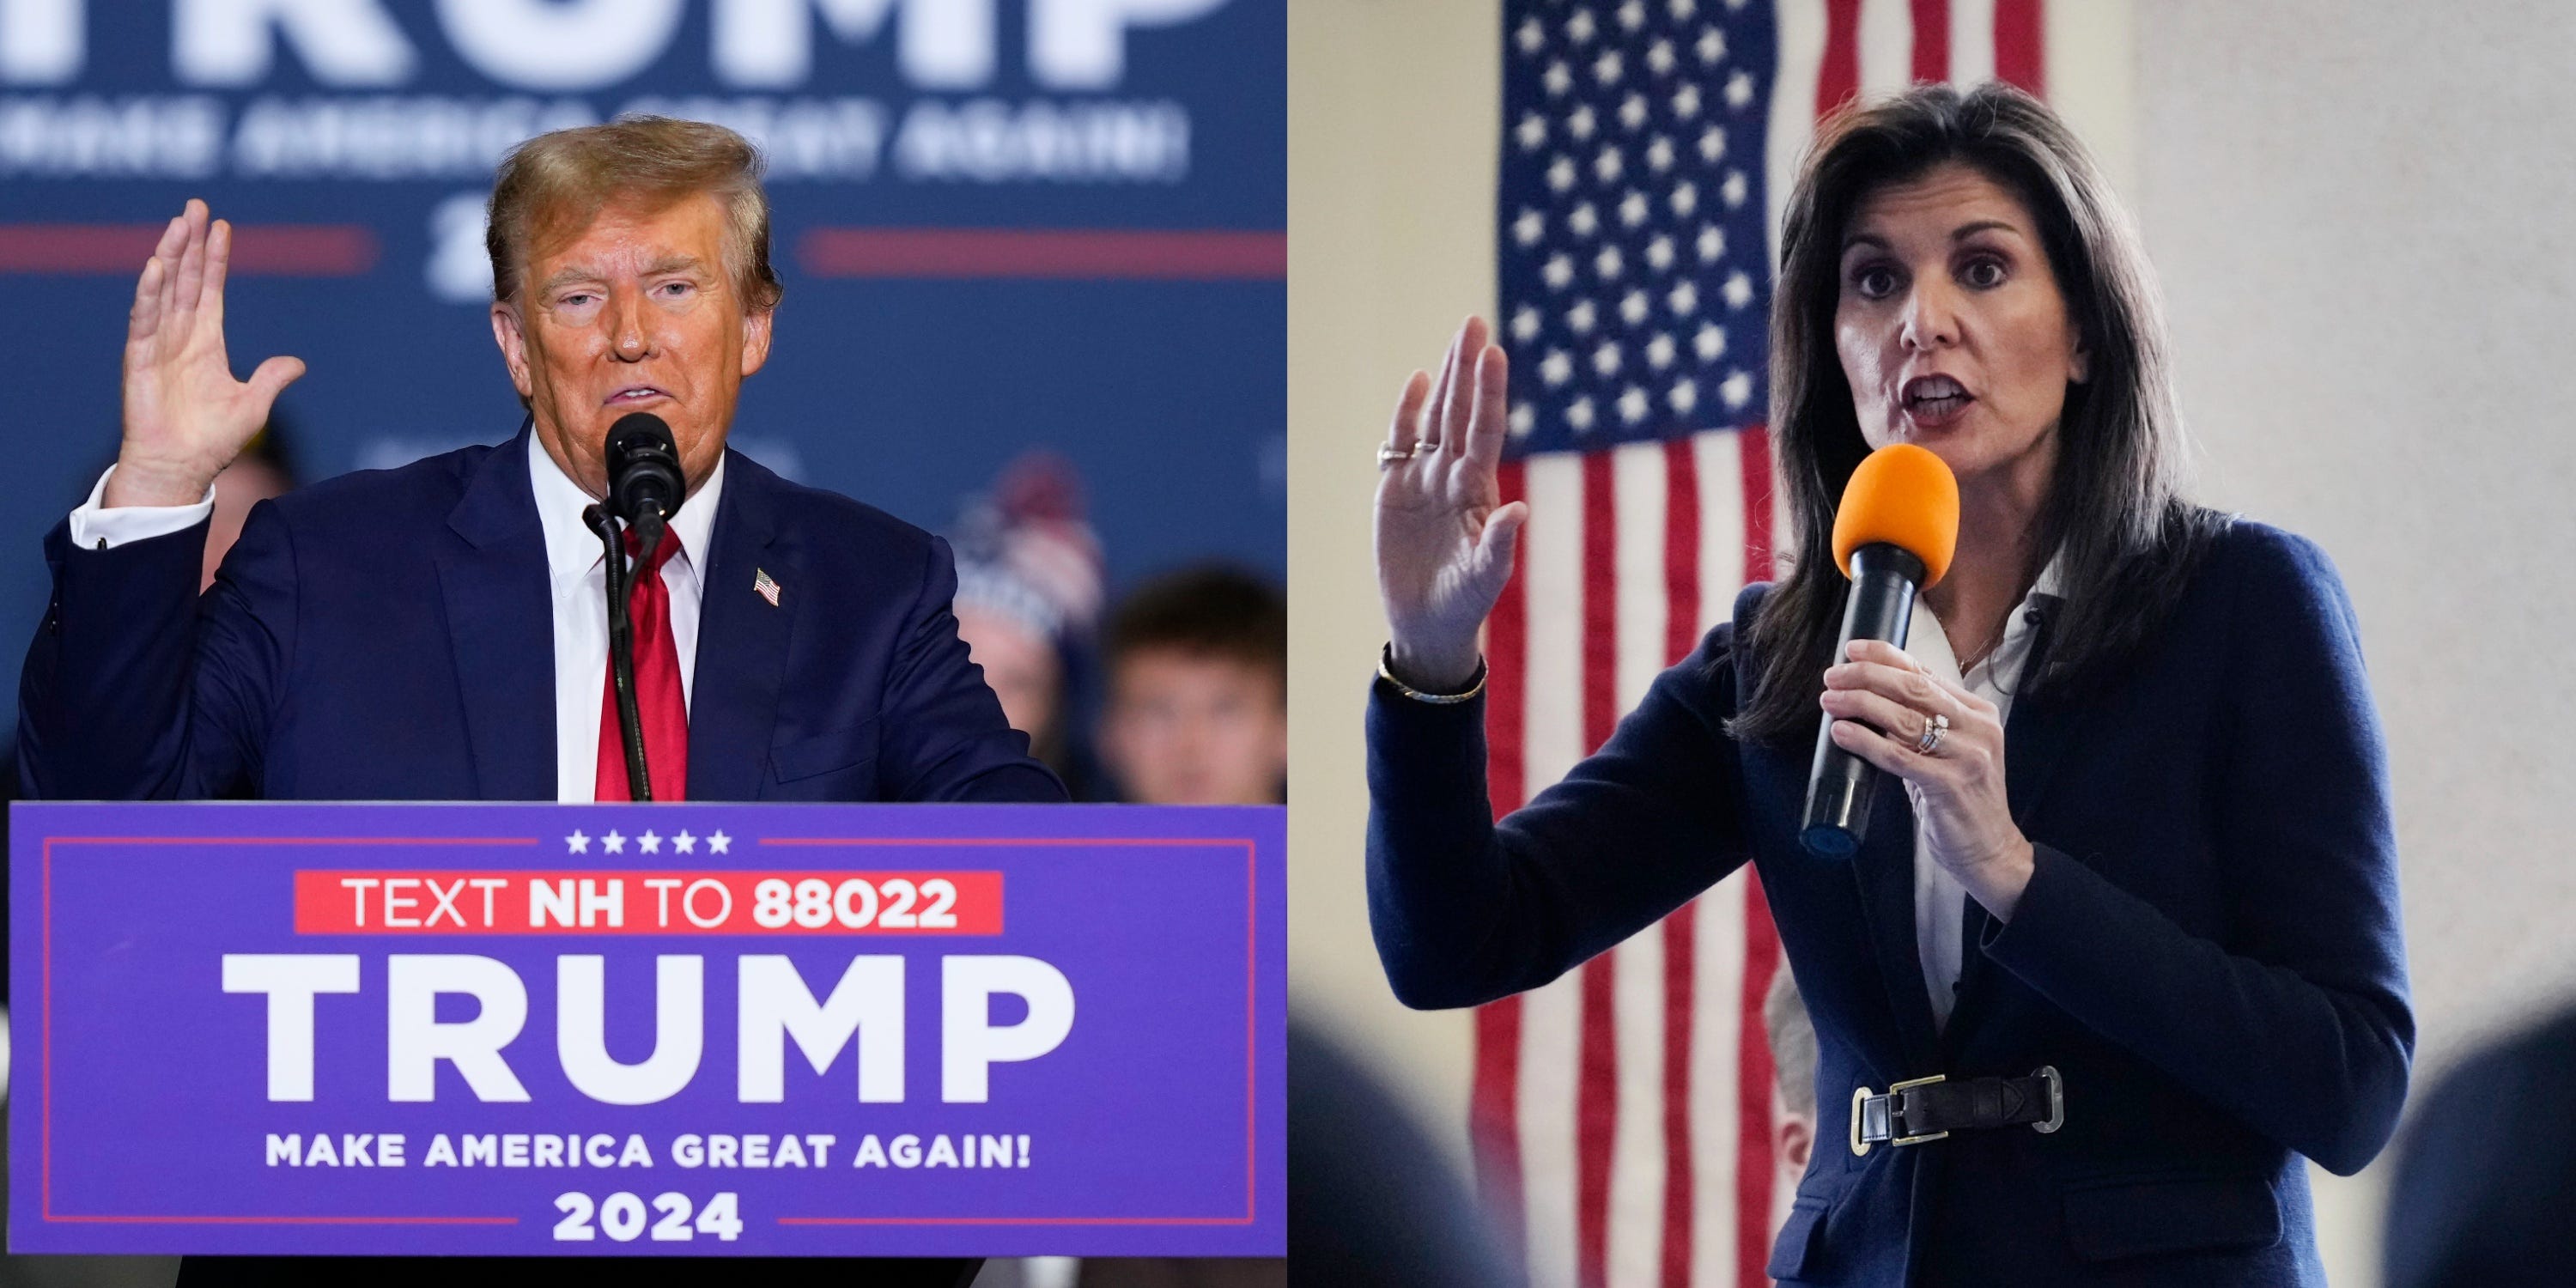 nikki haley says trump wants to 'control' the rnc and use it as a 'piggy bank' for his legal battles